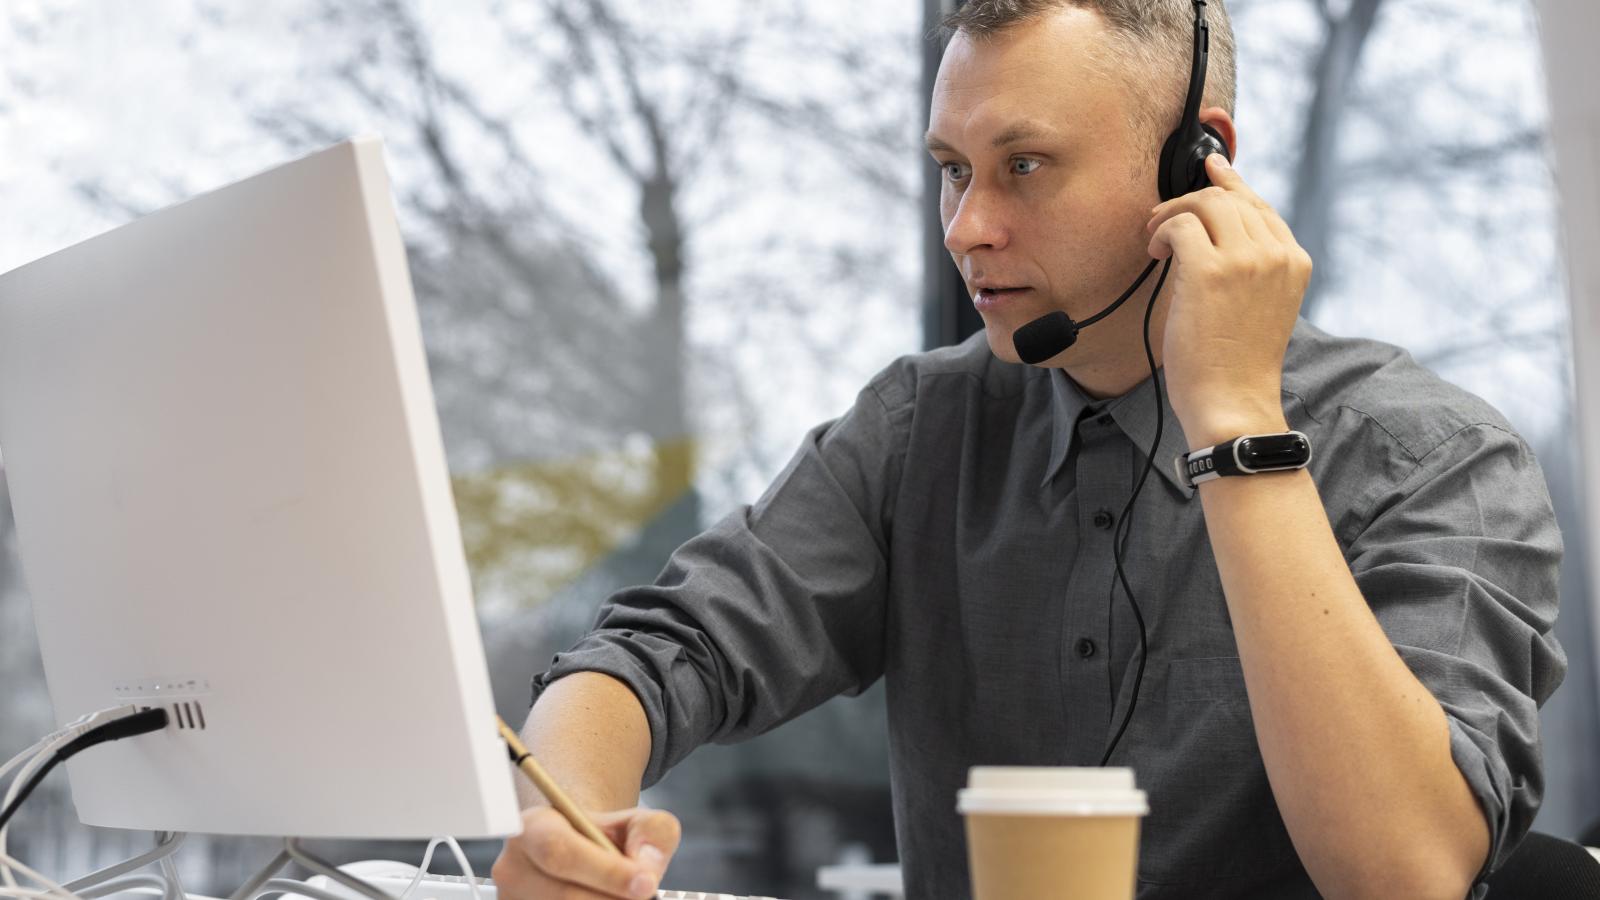 man-working-call-center-with-headphones-computer